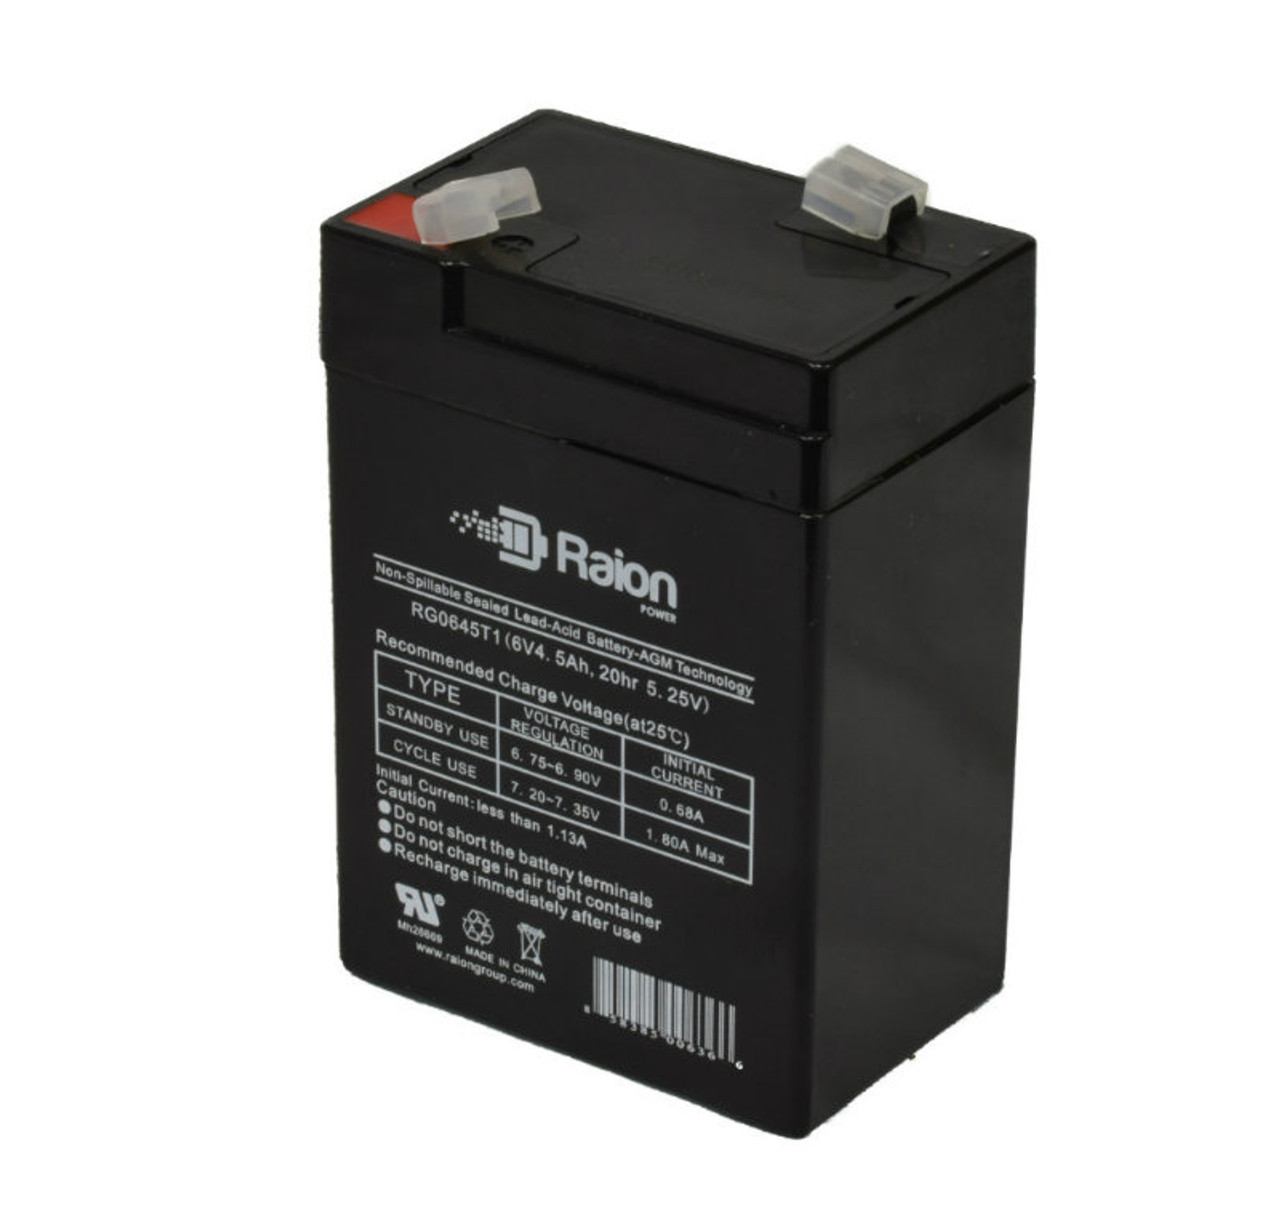 Raion Power RG0645T1 6V 4.5Ah Replacement Battery Cartridge for Discover D652